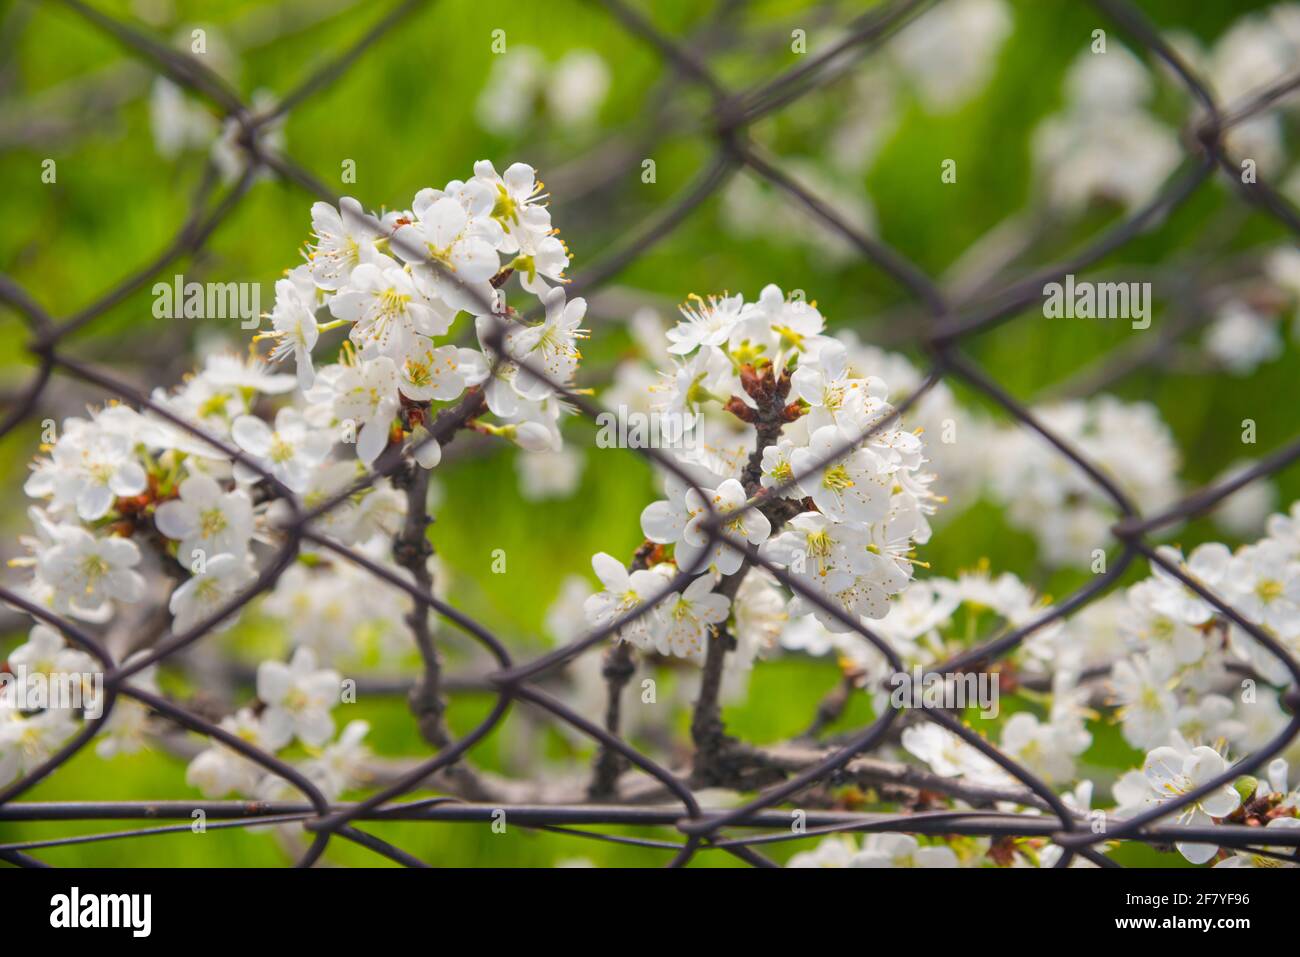 Flowered tree behind a wire netting. Stock Photo